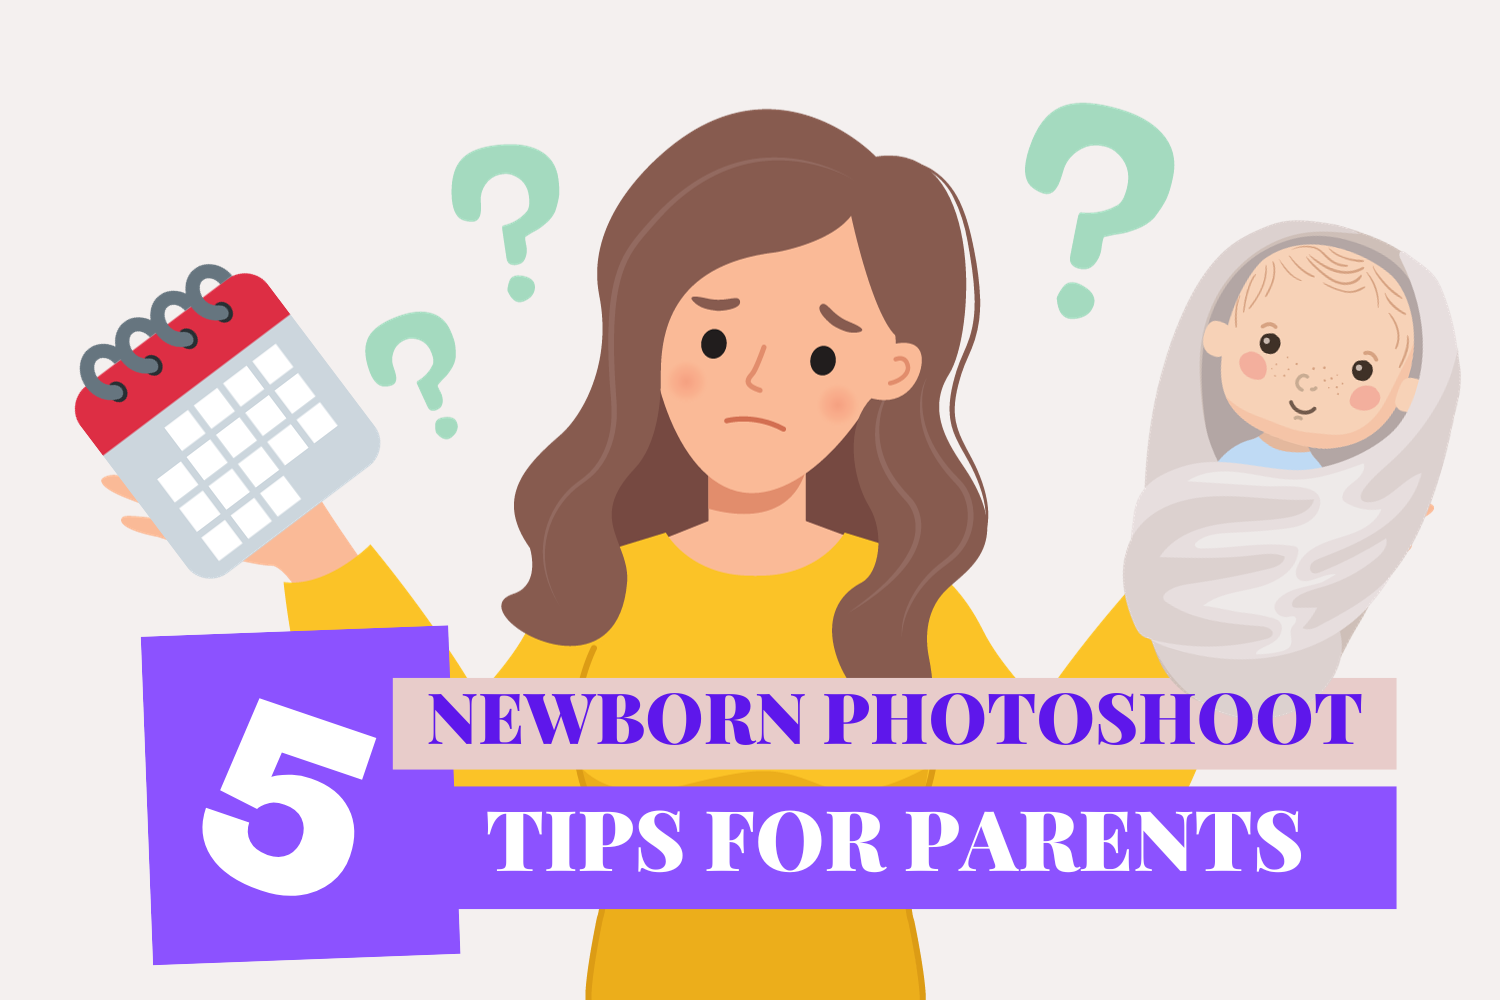 Newborn photoshoot tips for new parents